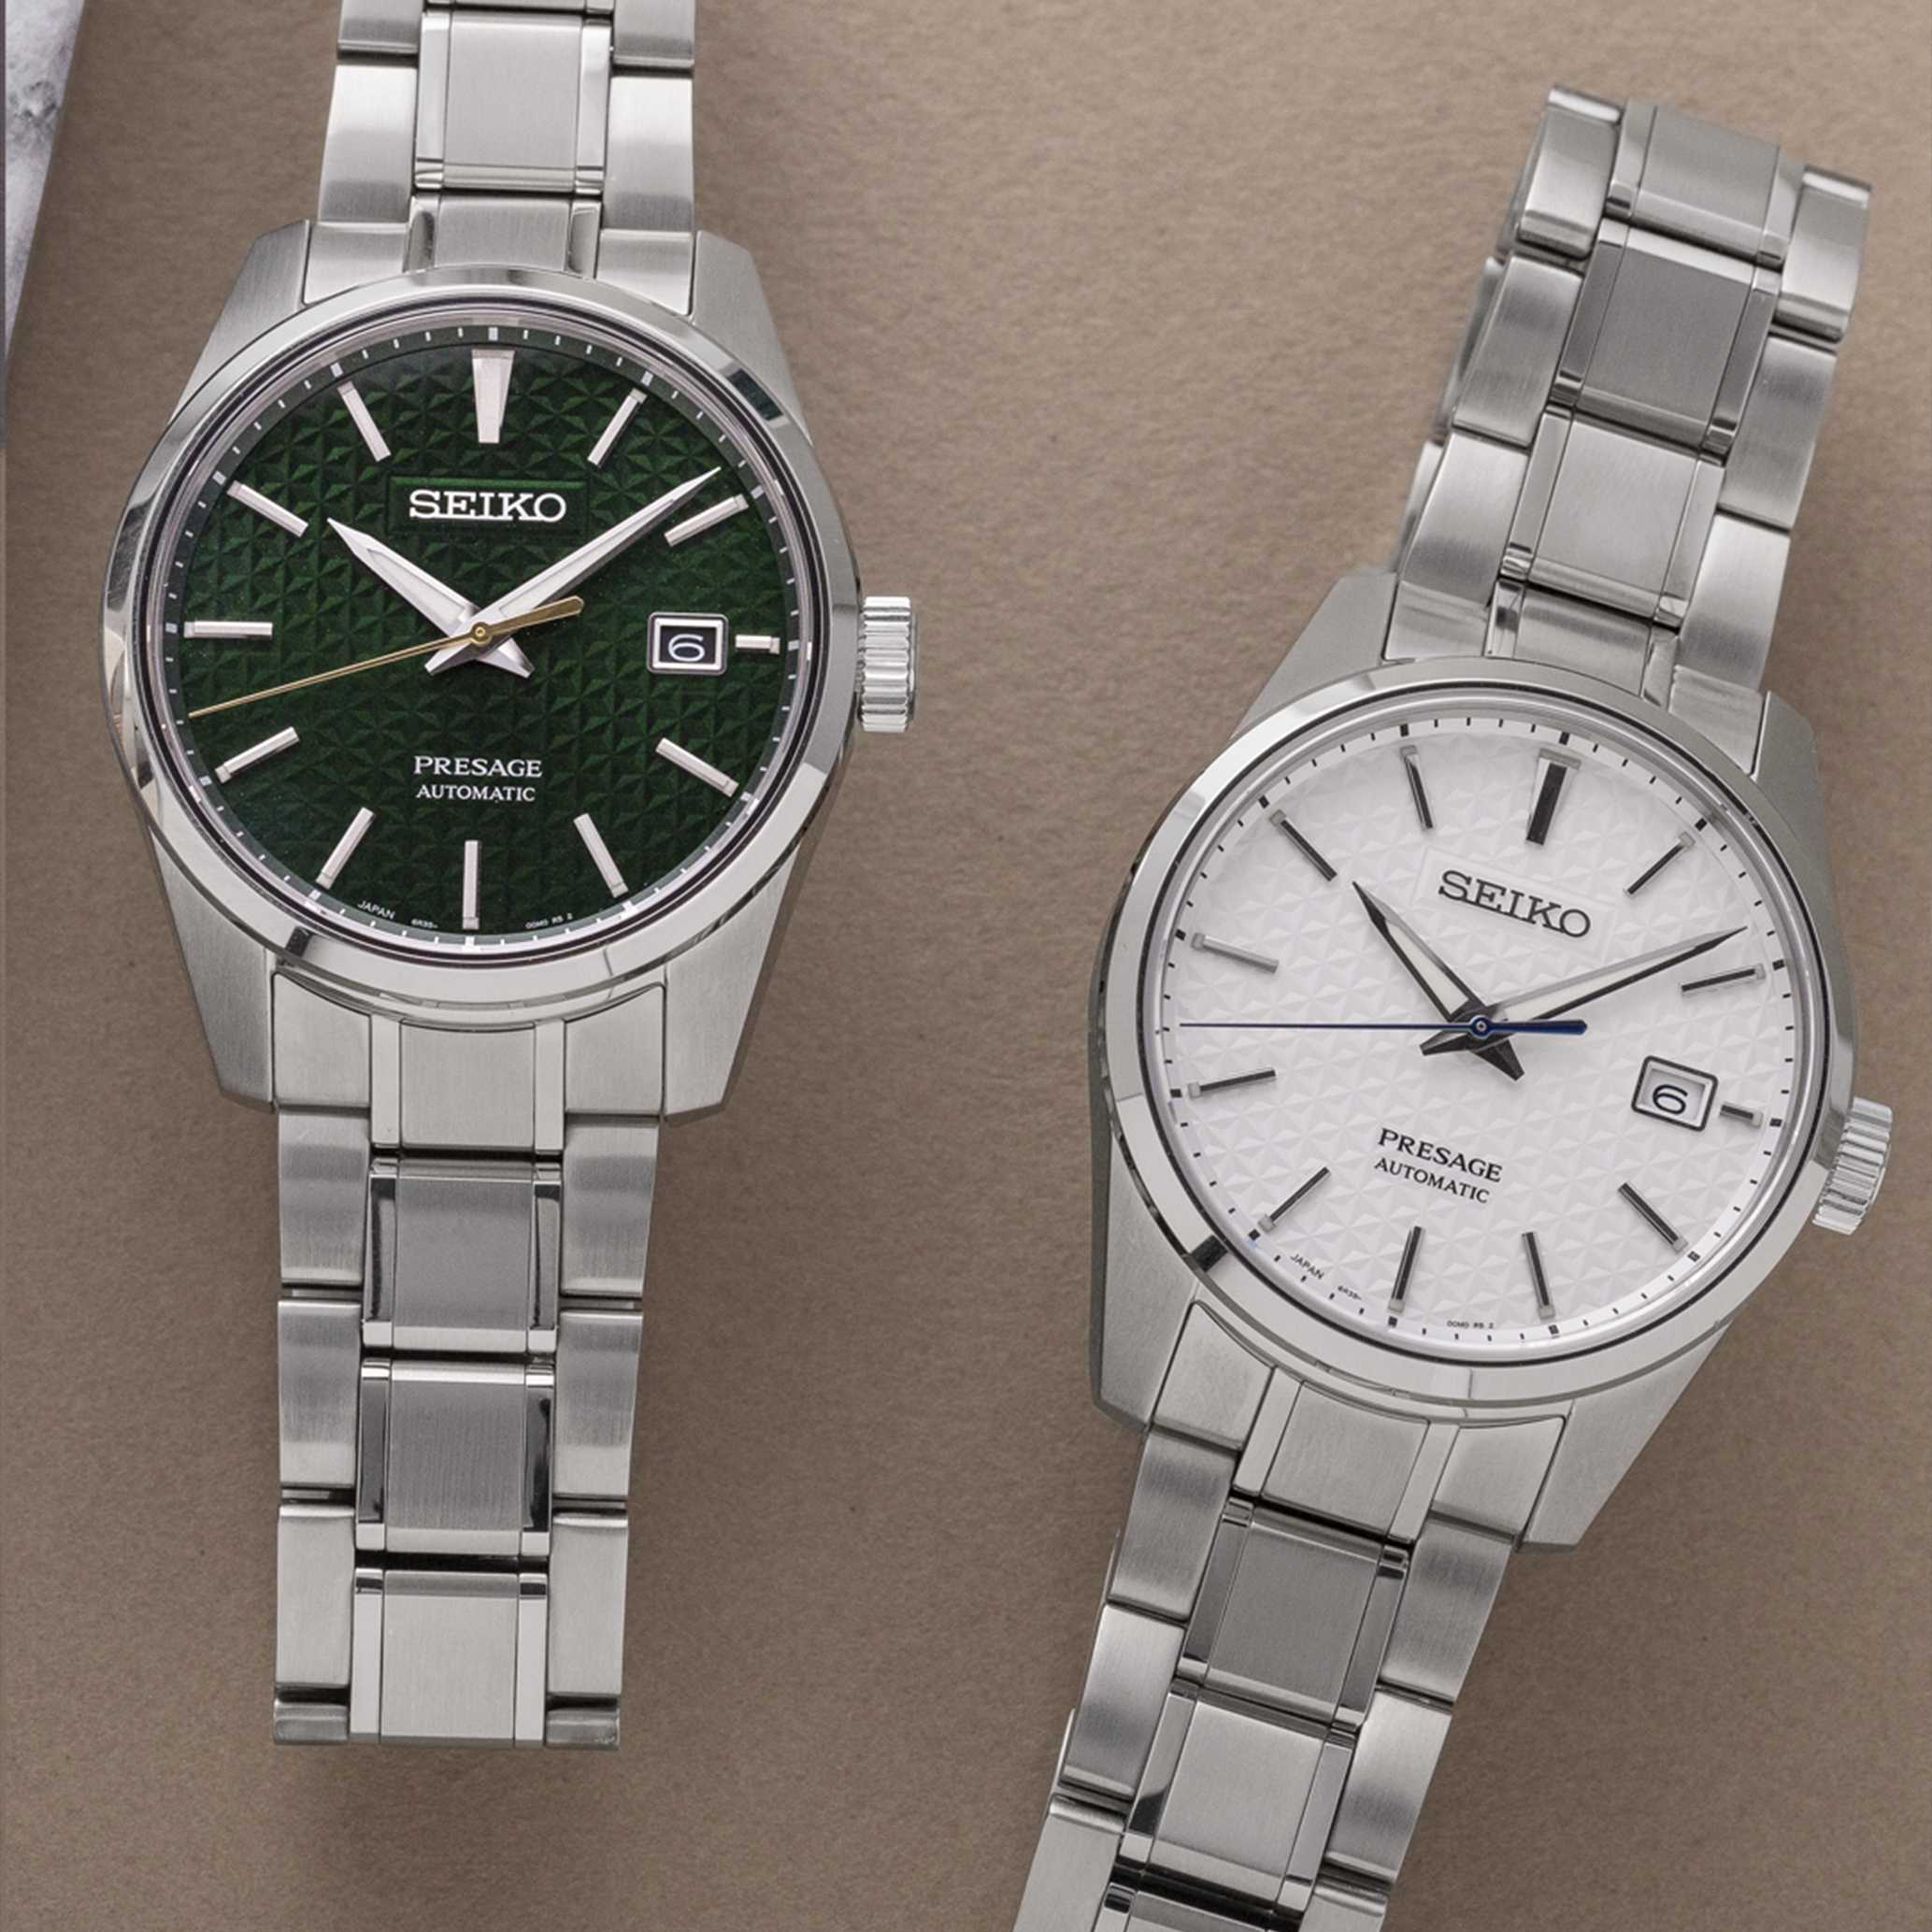 Seiko Presage Watches - Official UK retailer - First Class Watches™ IRL